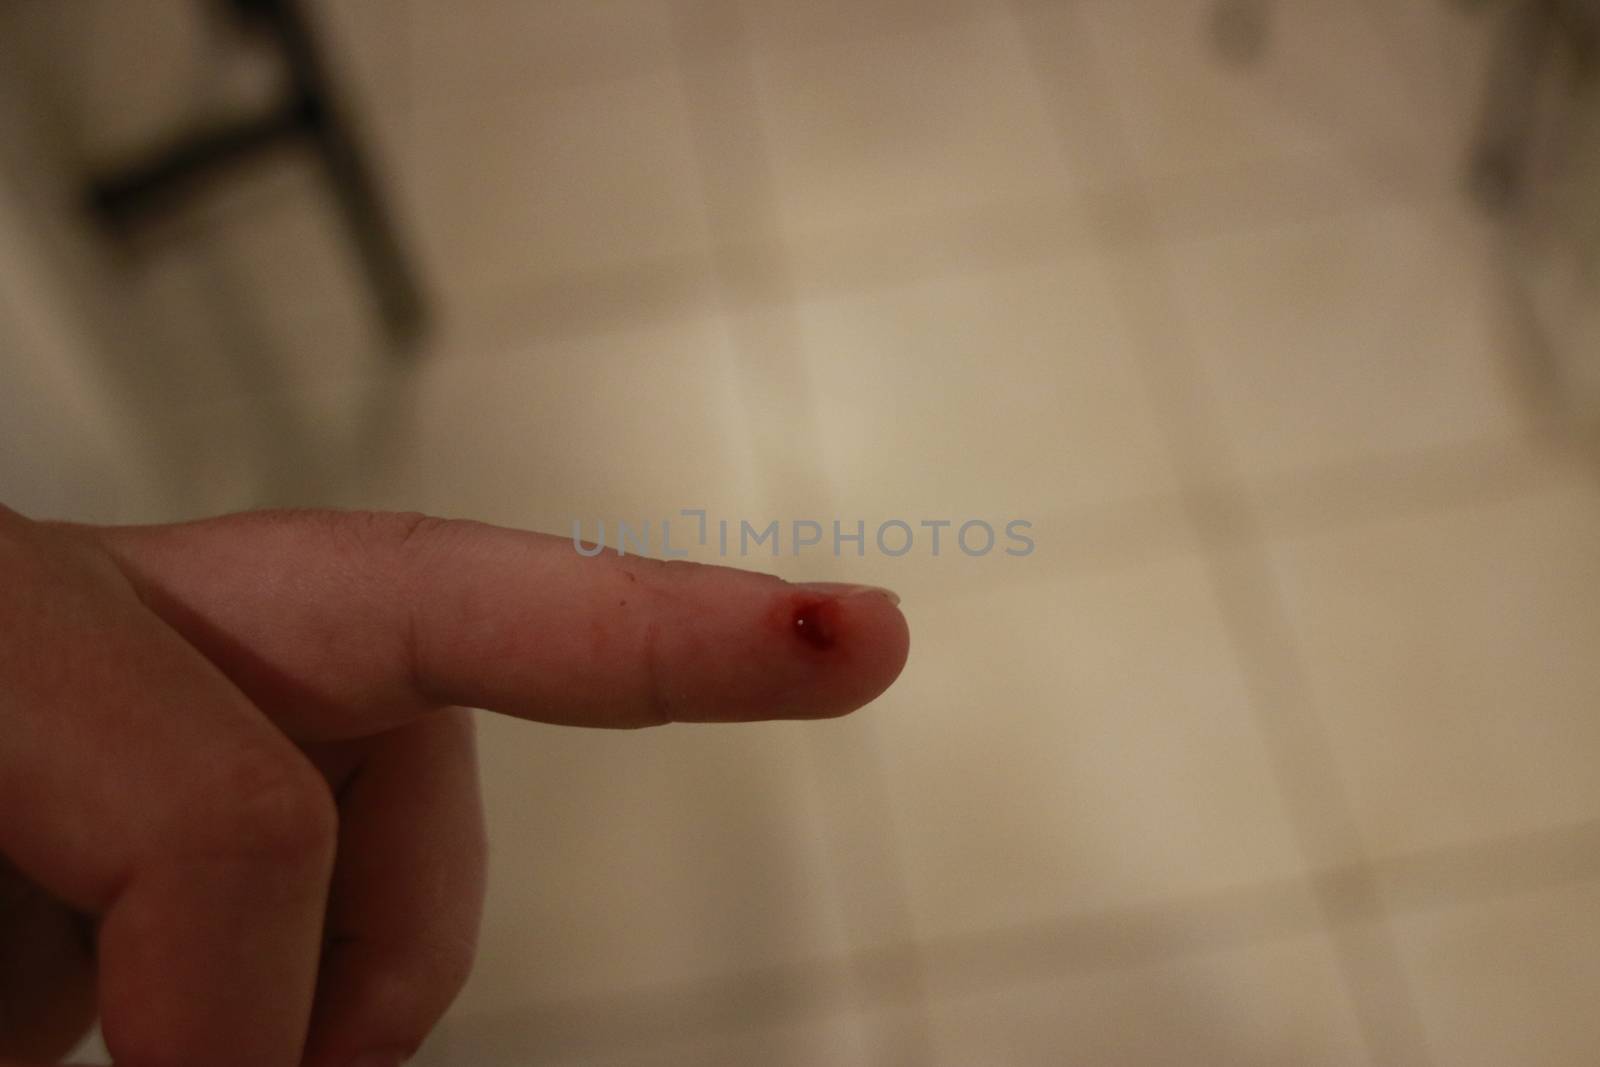 Bleeding blood from the cut finger wound. Injured finger with bleeding open cut wound. Closeup of finger human hand is cut hurt bleeding with bright red blood.. by mynewturtle1